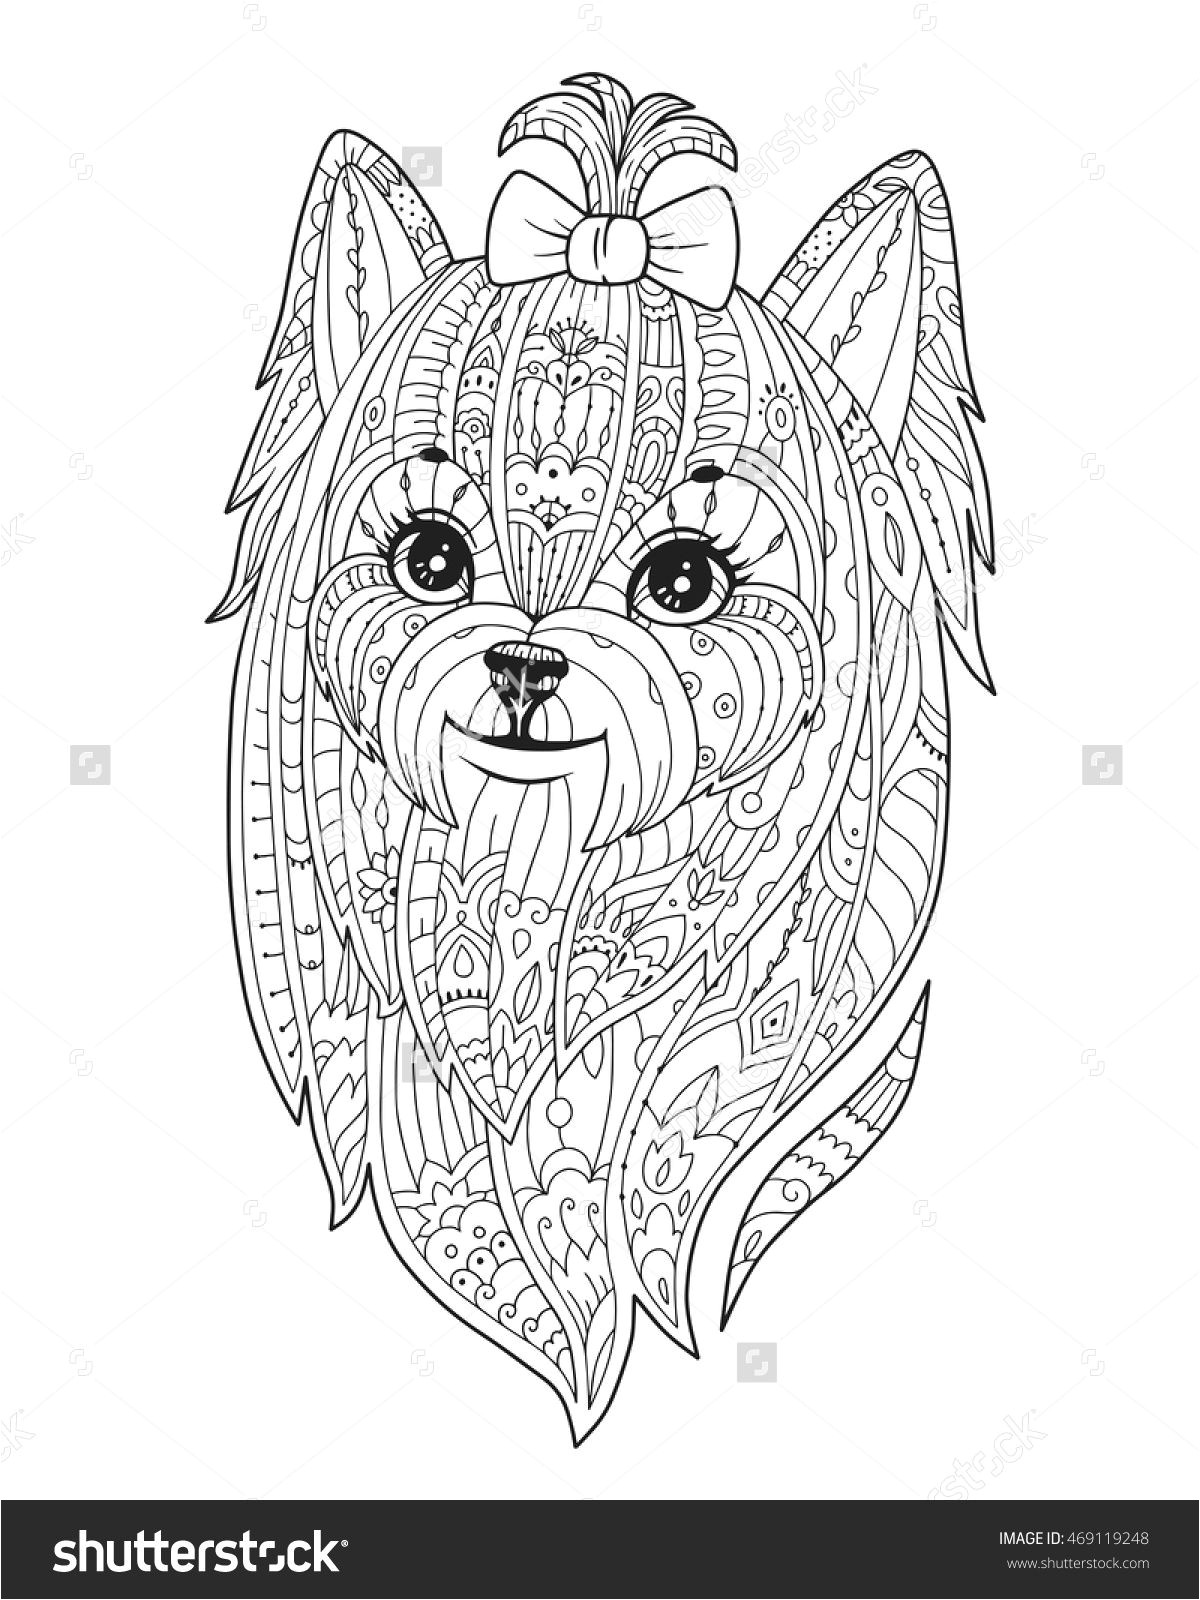 Doodle yorkshire terrier with bowknot Zen art Graphic illustration in vector for T shirt emblem tattoo logo